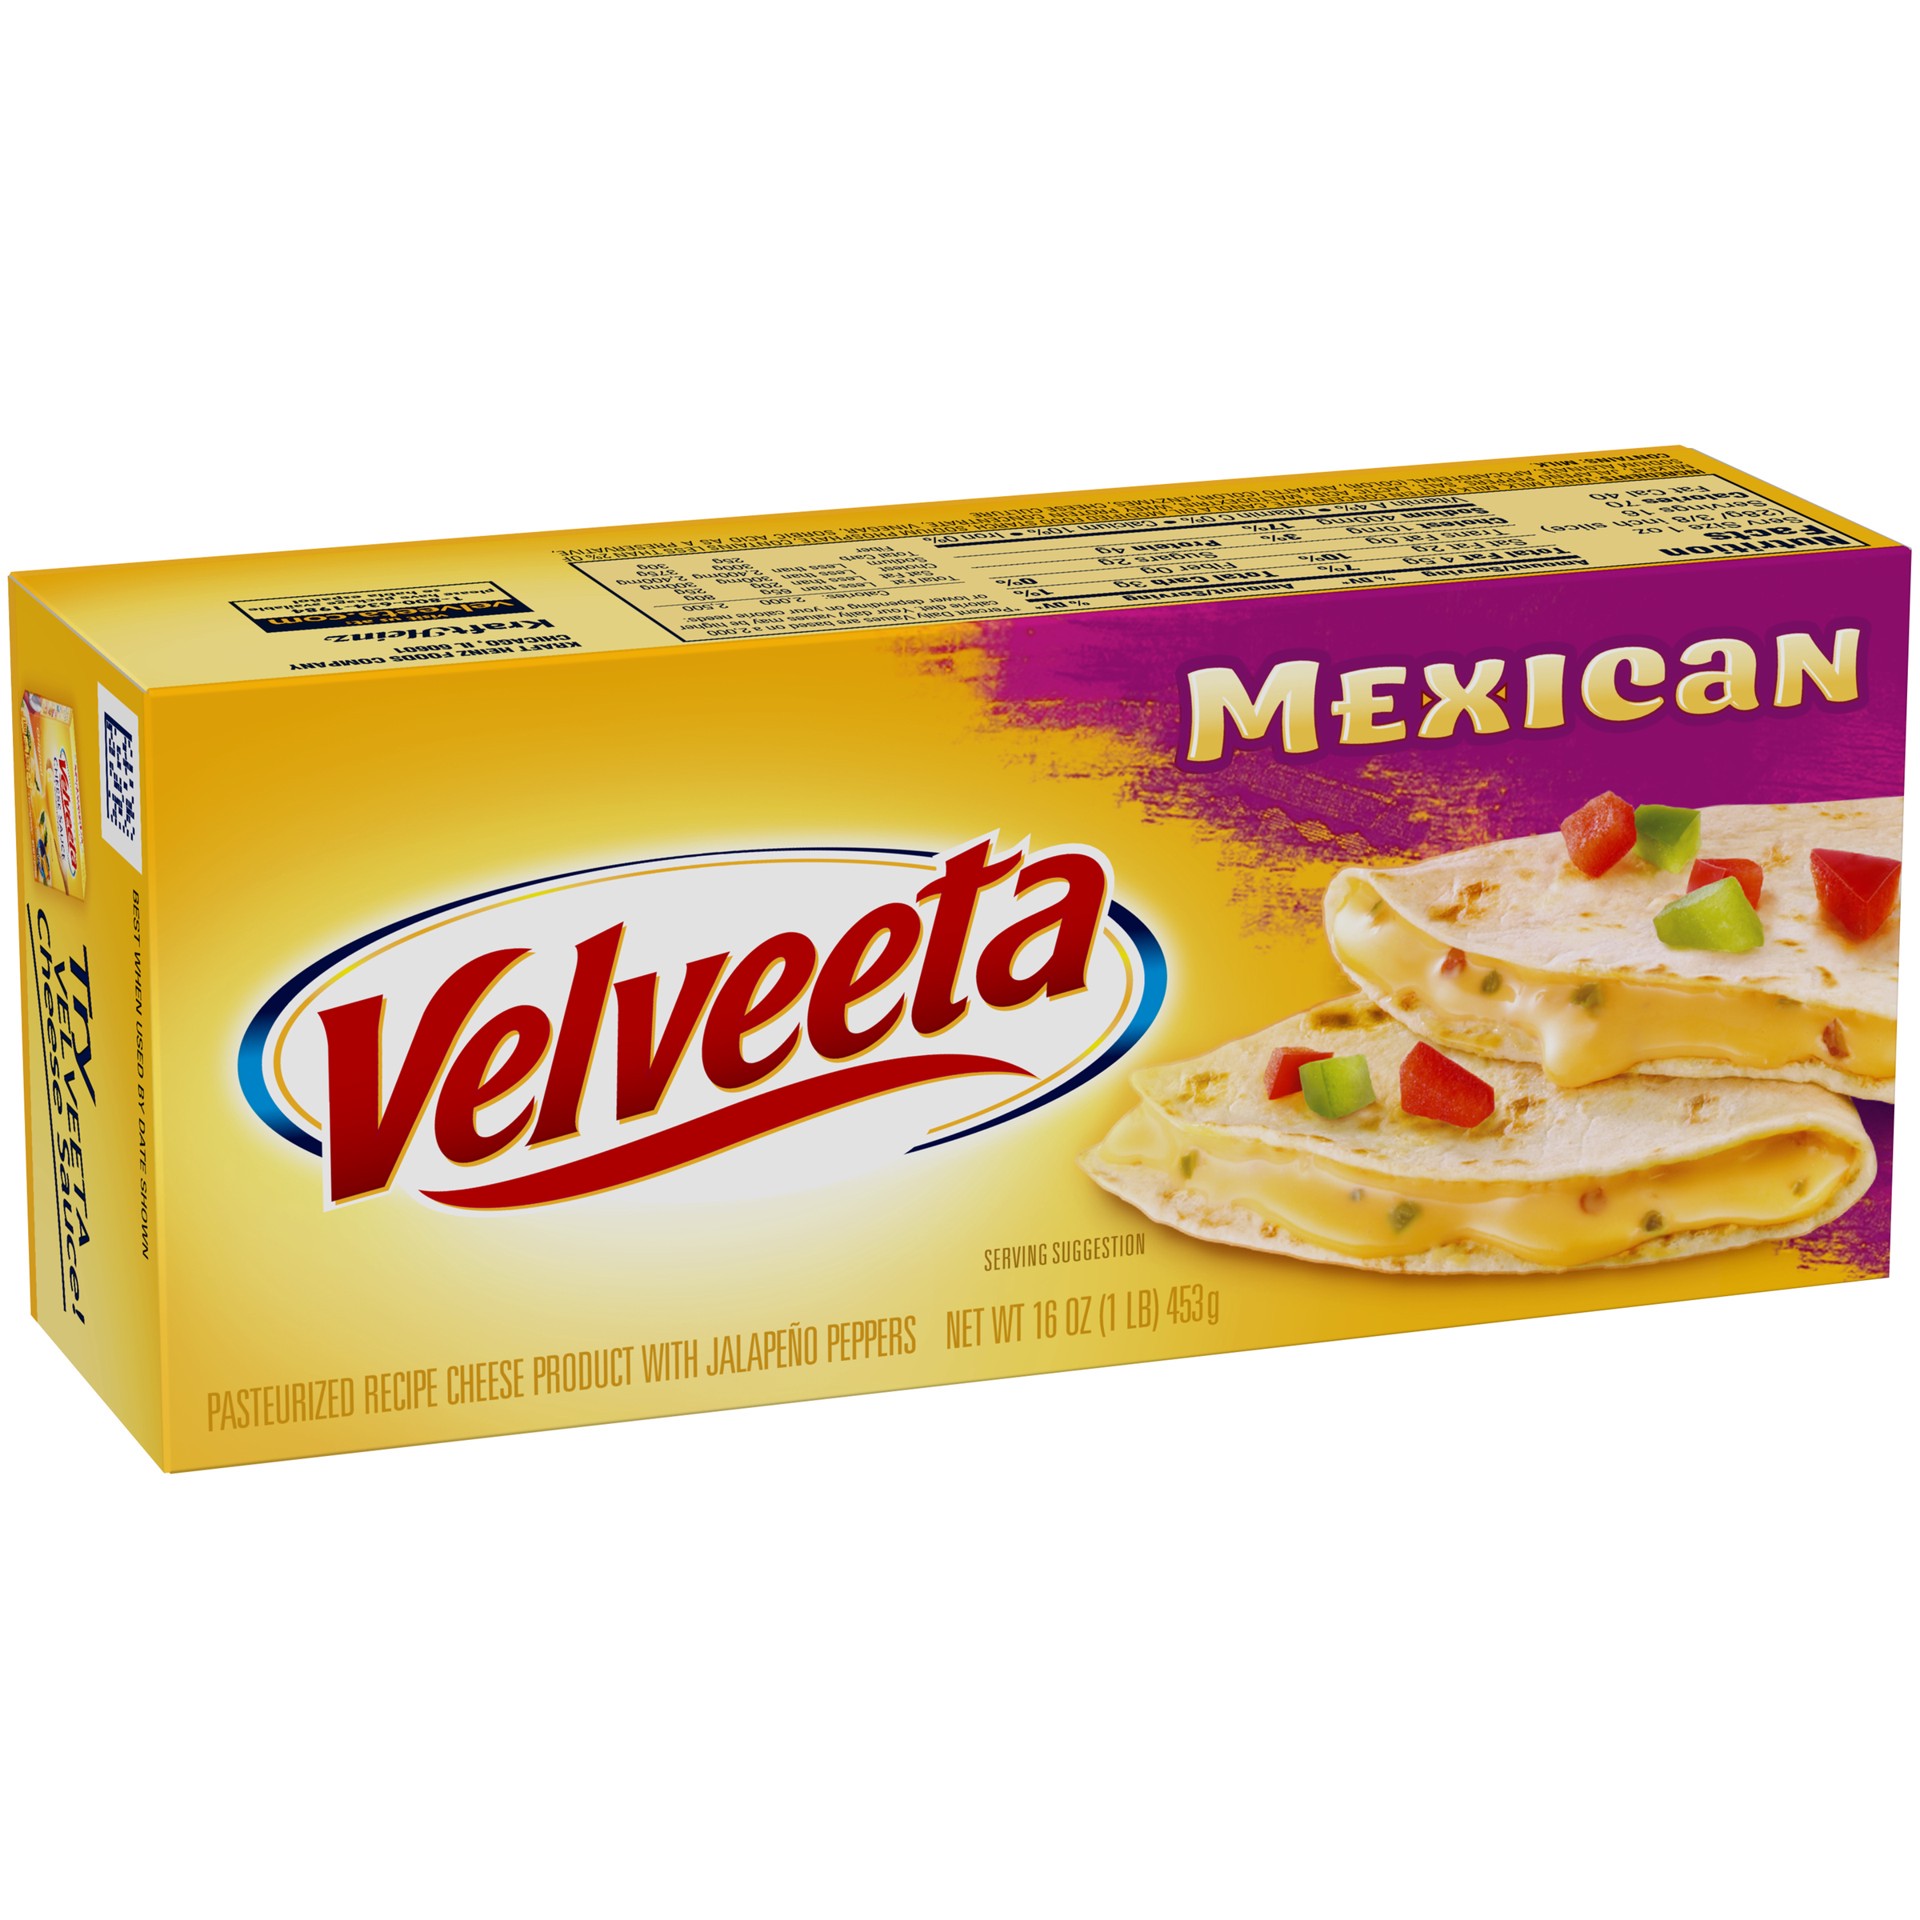 slide 6 of 6, Velveeta Mexican Pasteurized Recipe Cheese Product with Jalapeno Peppers Block, 16 oz